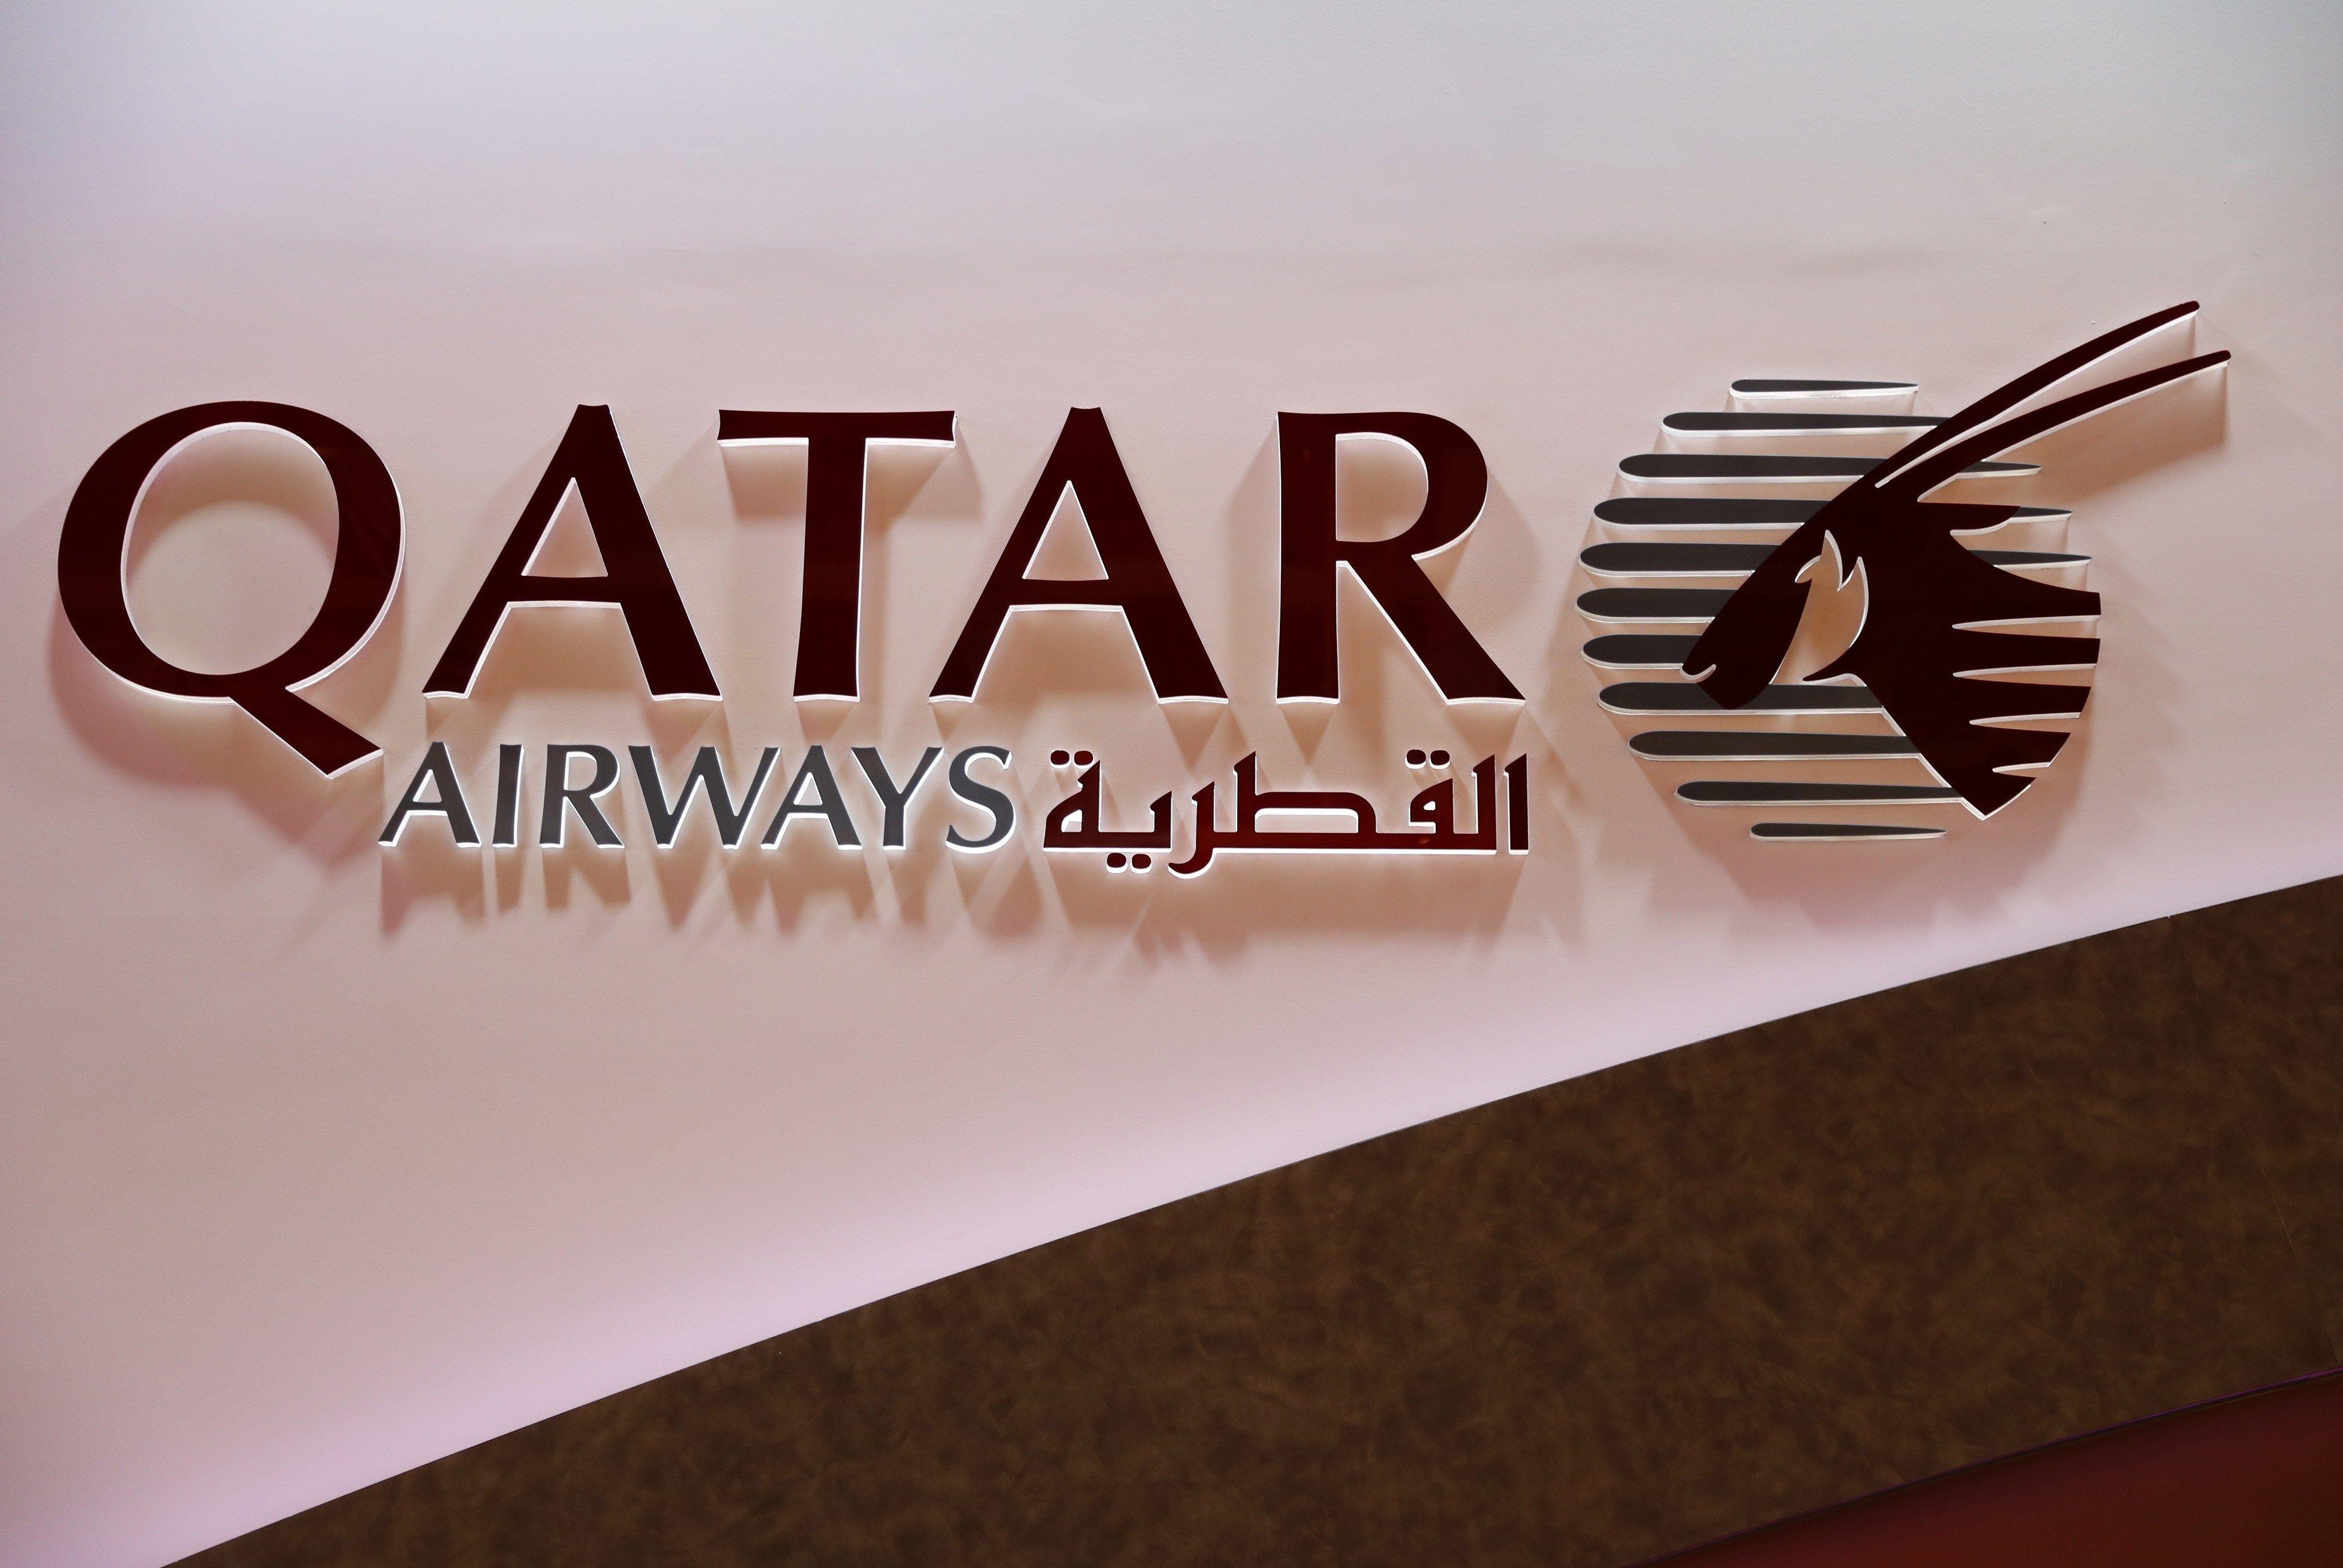 Qatar Airways Logo - Qatar Airways is reviewing plans for its own domestic Indian airline ...